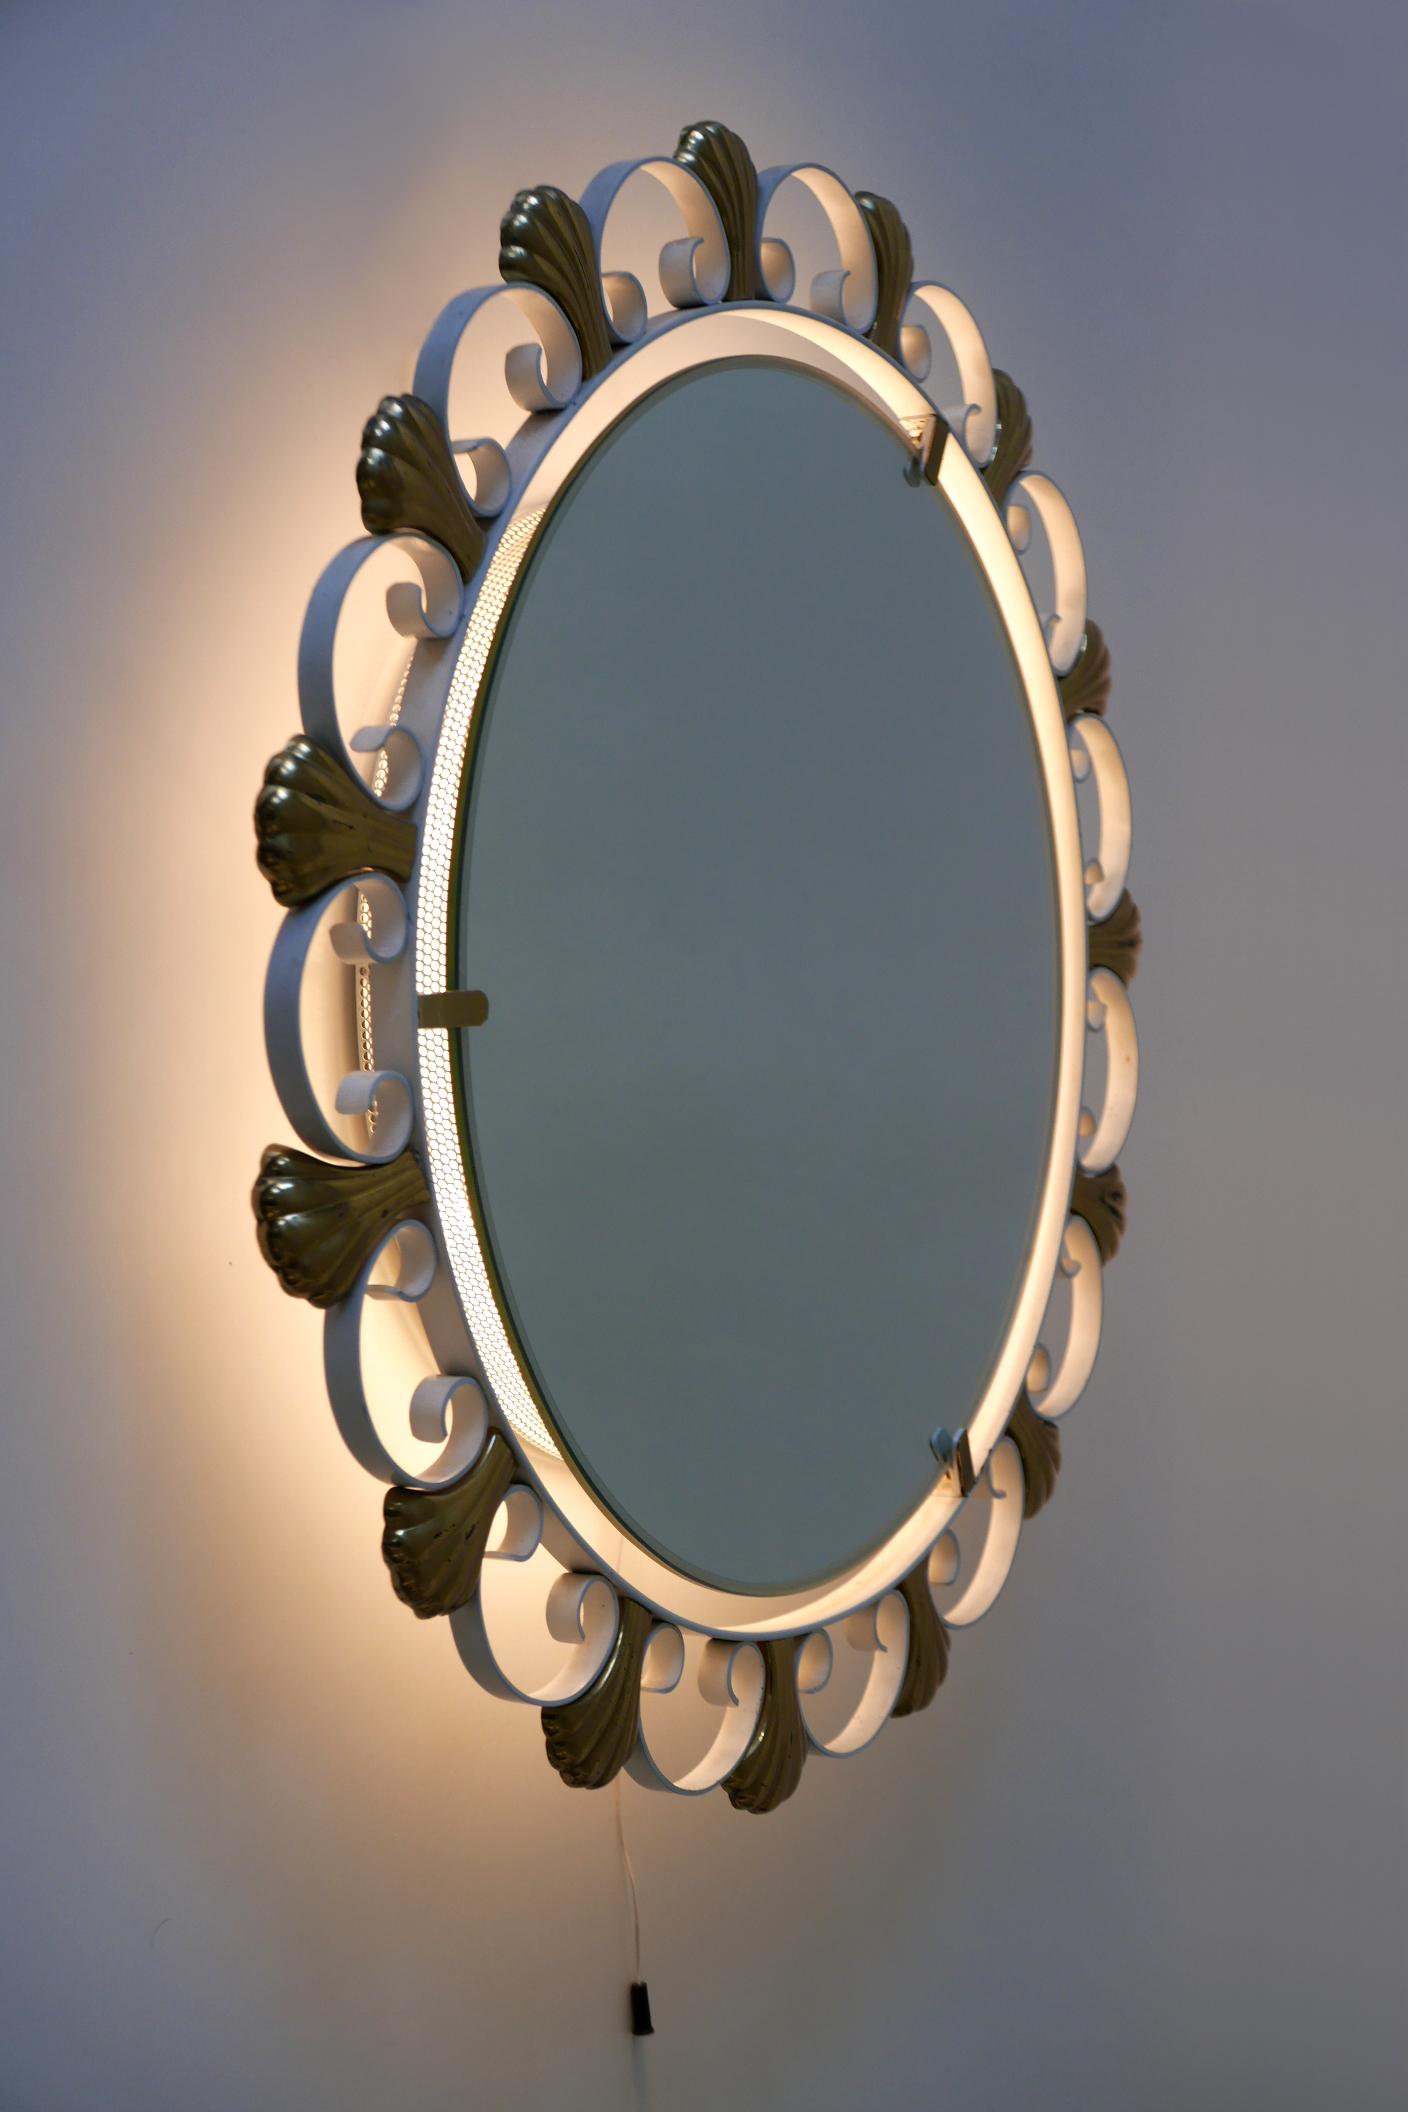 Elegant Mid-Century Modern Backlit Wall Mirror by Hillebrand, 1960s, Germany For Sale 7